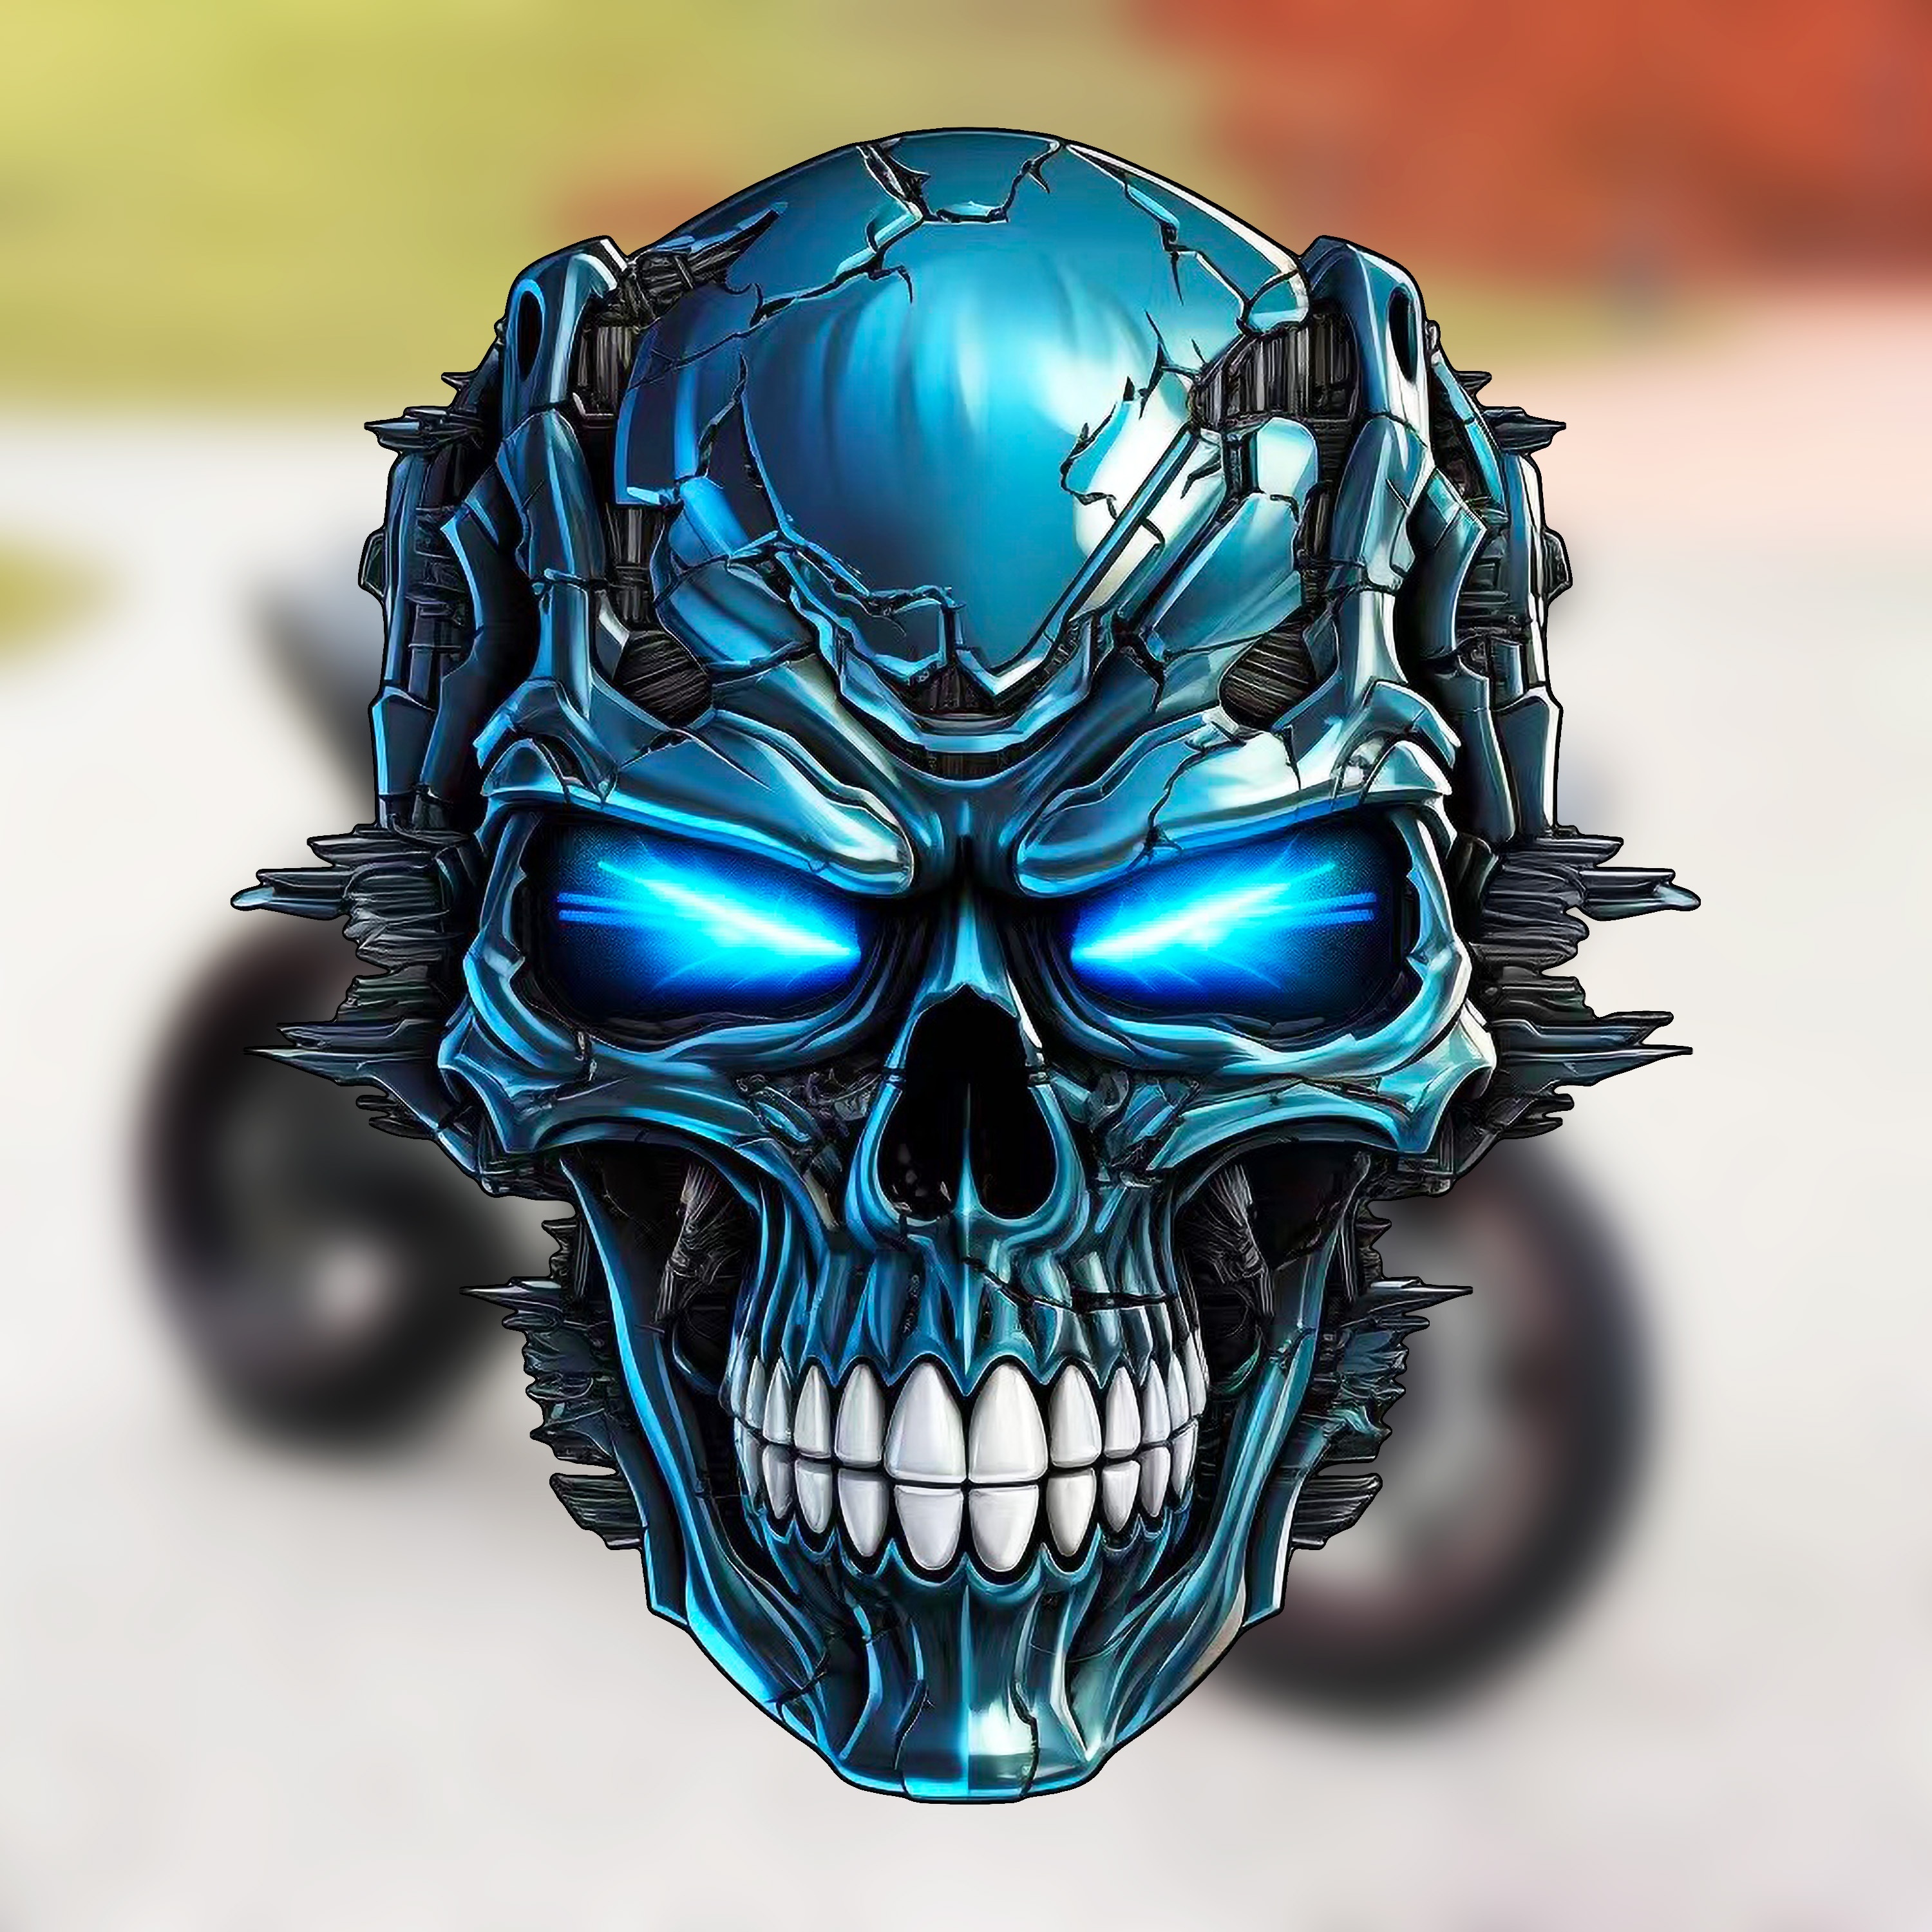 3D Metal Skull Punisher Emblem Sticker 2-Pack, Cars Adornment Metal Sticker  Decals for Cars, Trucks, Motorcycle, Vehicle, Luggage, Laptop (Black)